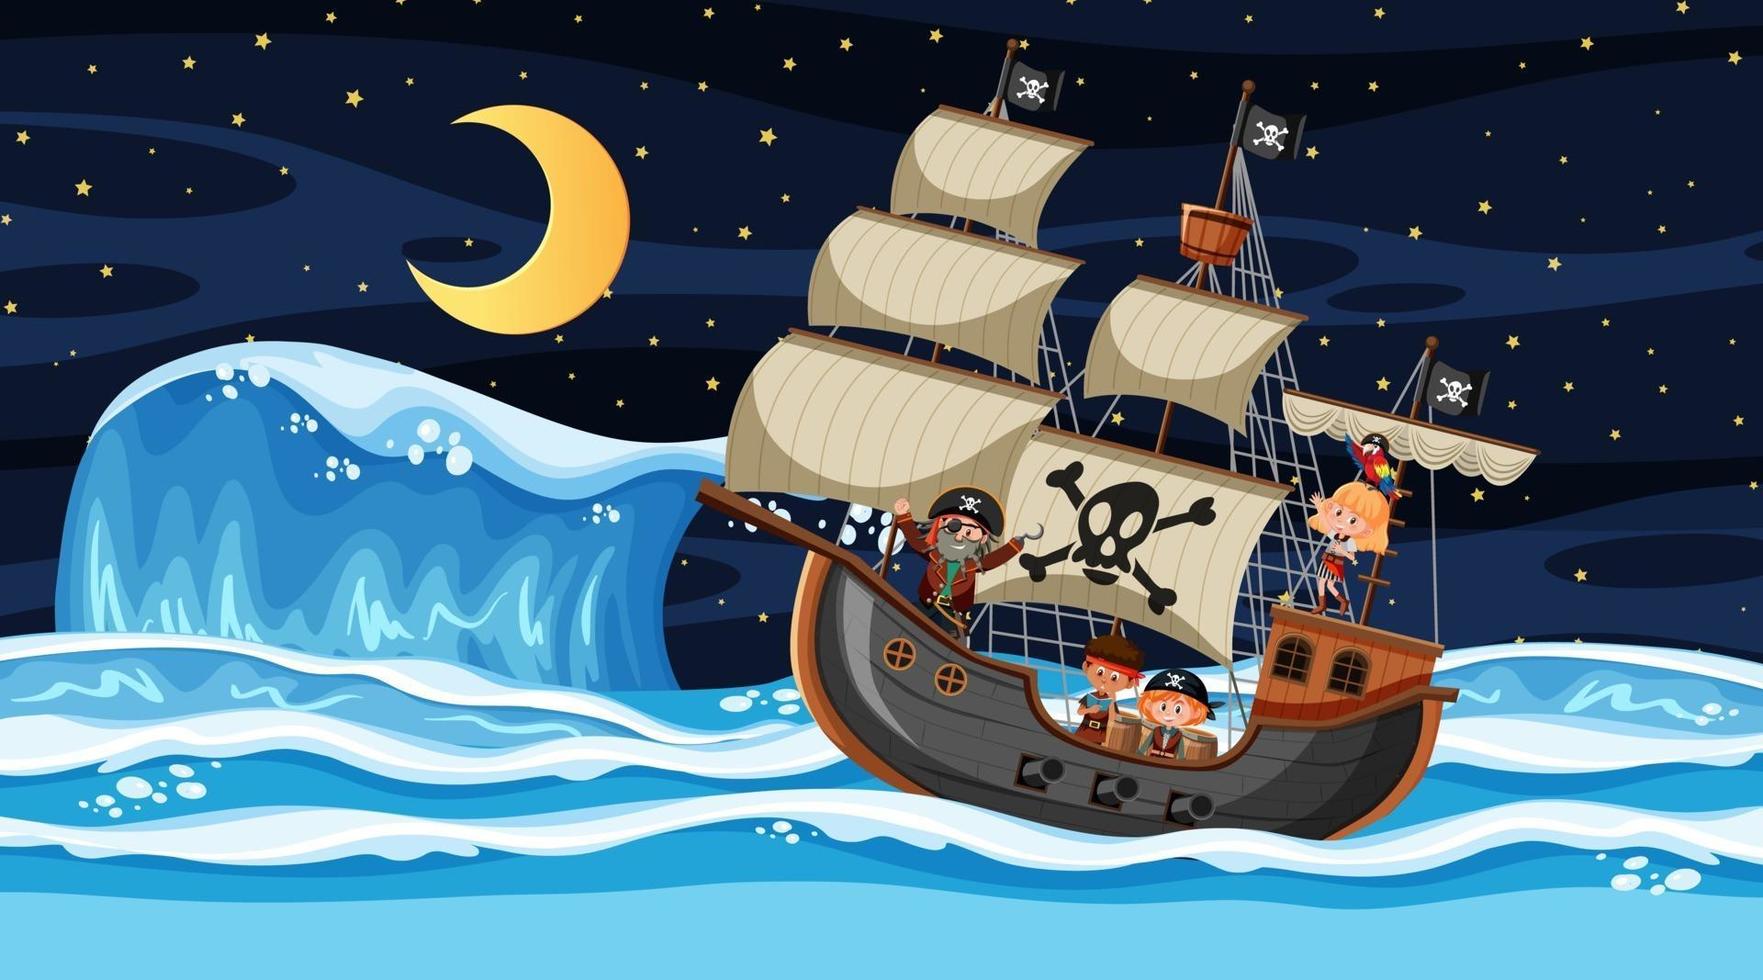 Ocean with Pirate ship at night scene in cartoon style vector